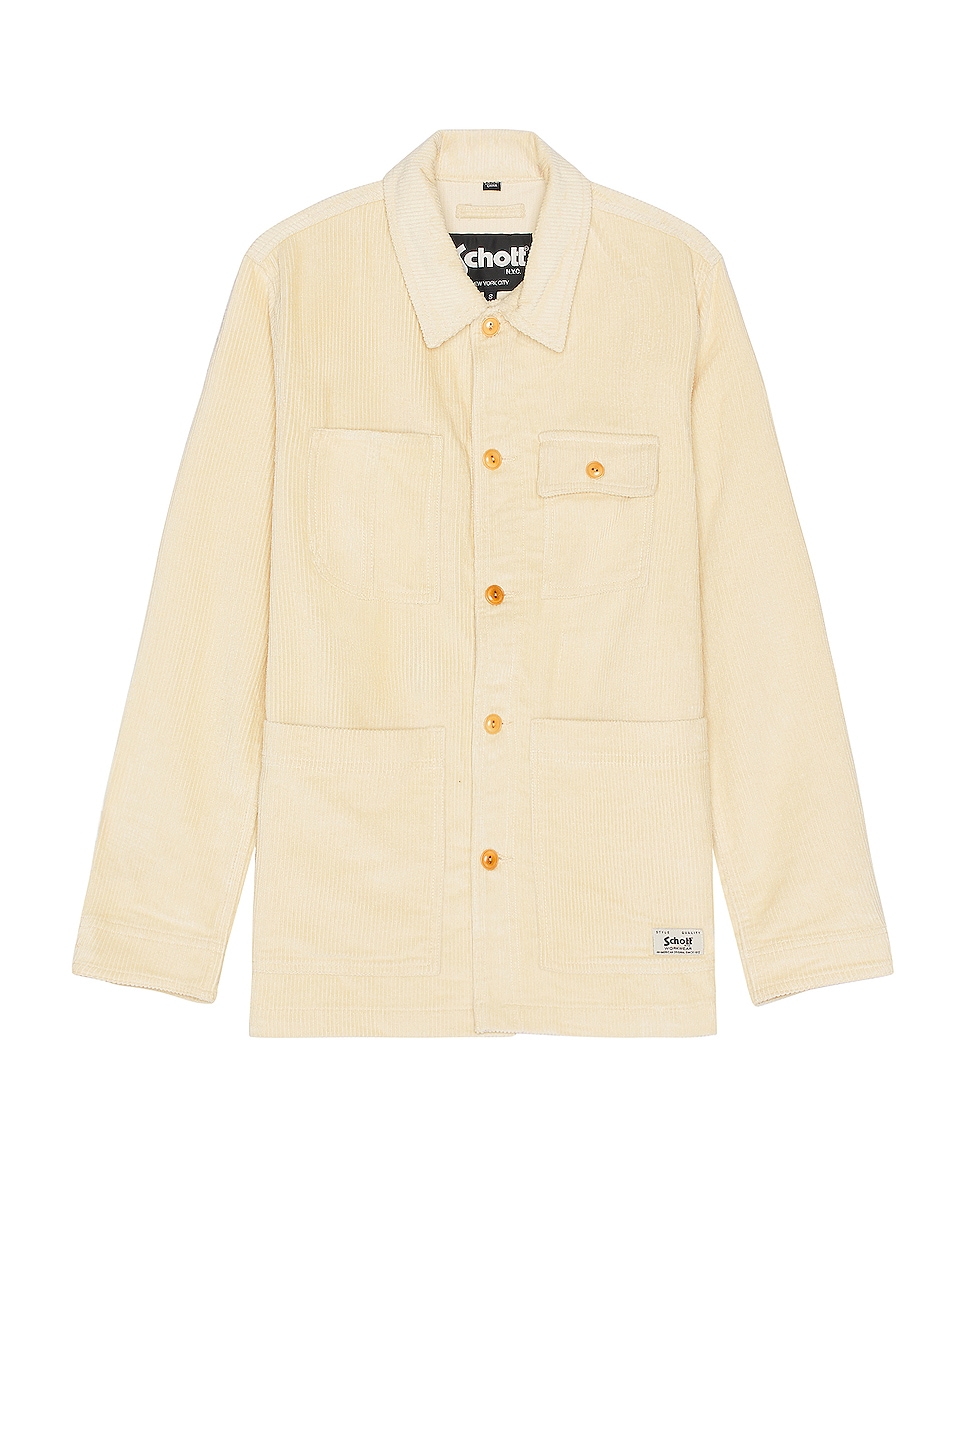 Image 1 of Schott Wale Chore Jacket in Off White